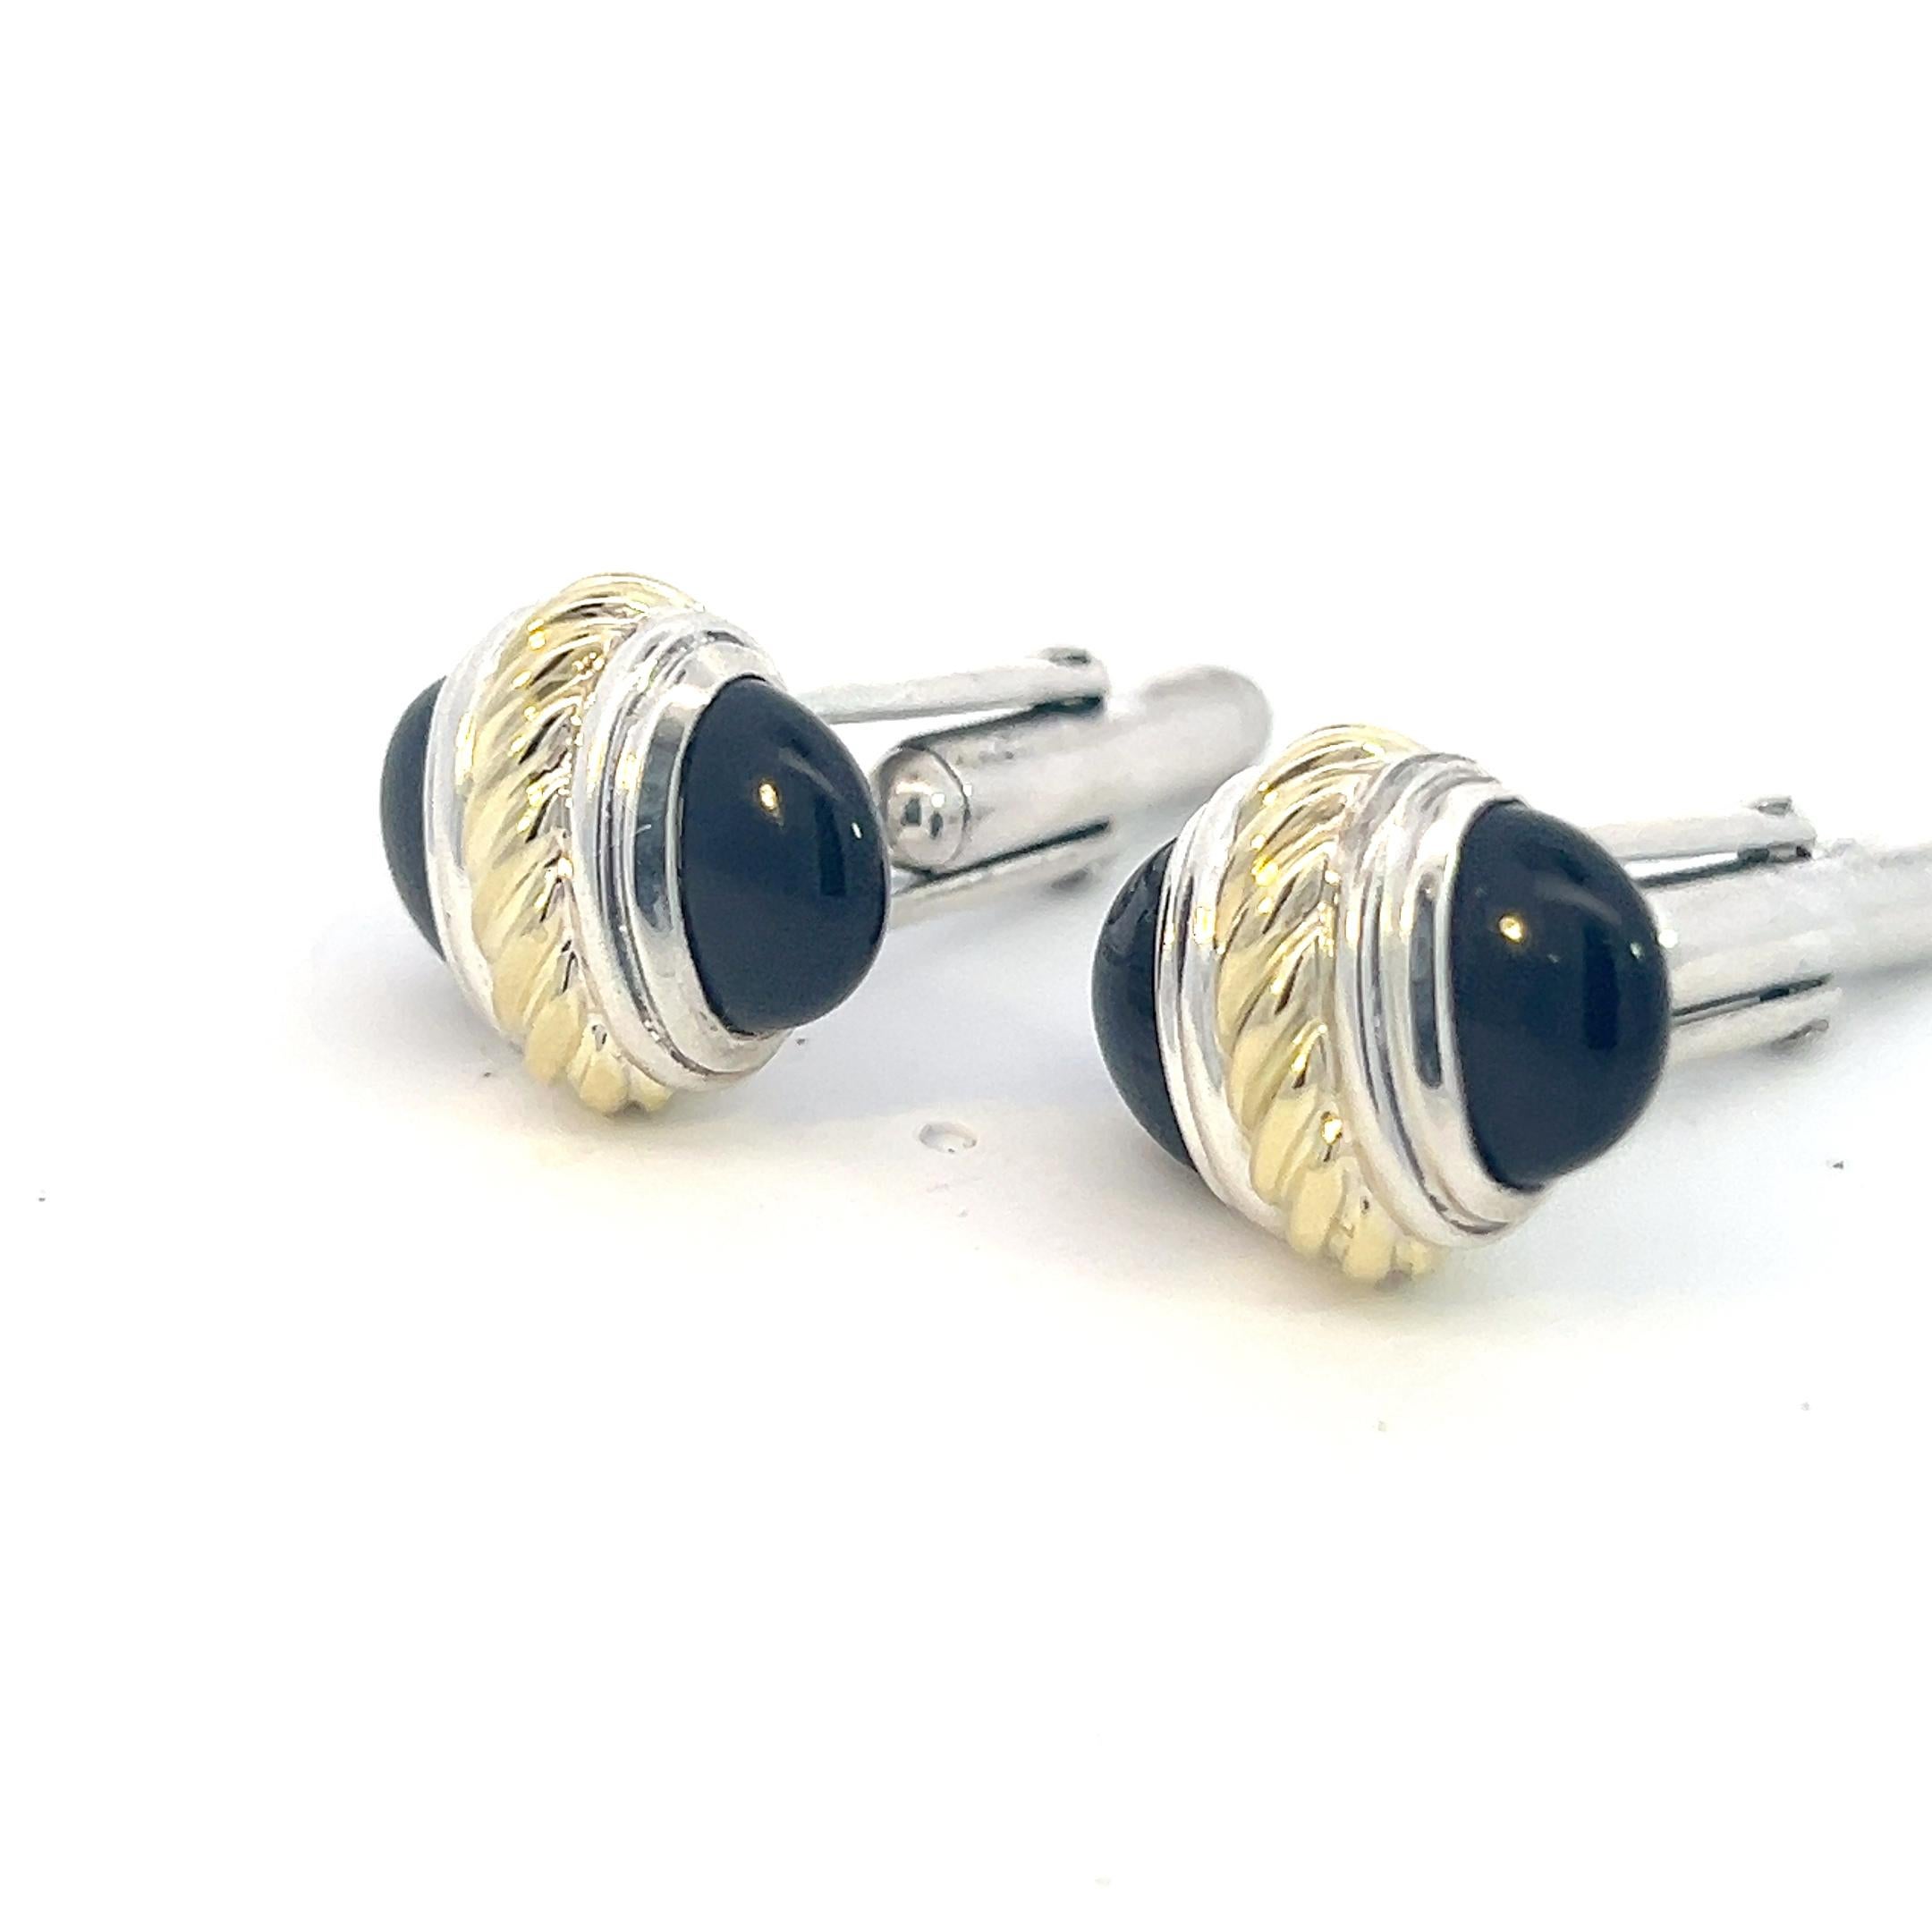 Authentic David Yurman Estate Onyx Cufflinks 14k Gold & Silver 12.5 Grams DY420

Retail: $990.00

TRUSTED SELLER SINCE 2002

PLEASE SEE OUR HUNDREDS OF POSITIVE FEEDBACKS FROM OUR CLIENTS!!

FREE SHIPPING

Details
Cufflinks: Onyx Cufflinks
Weight: